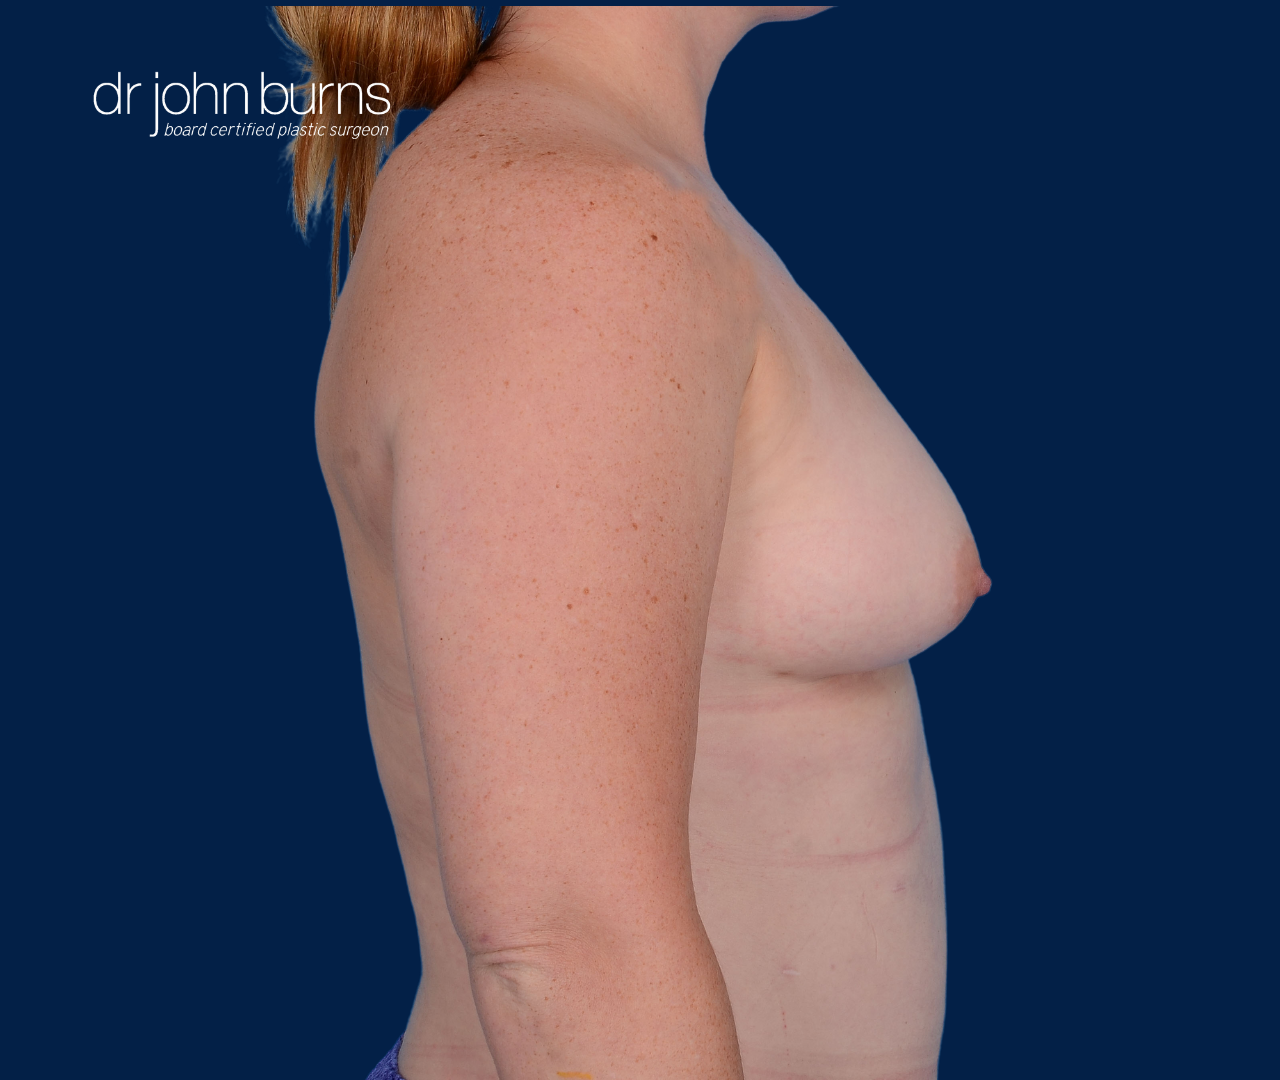 case 16- profile view | after fat transfer to breast by top plastic surgeon, Dr. John Burns